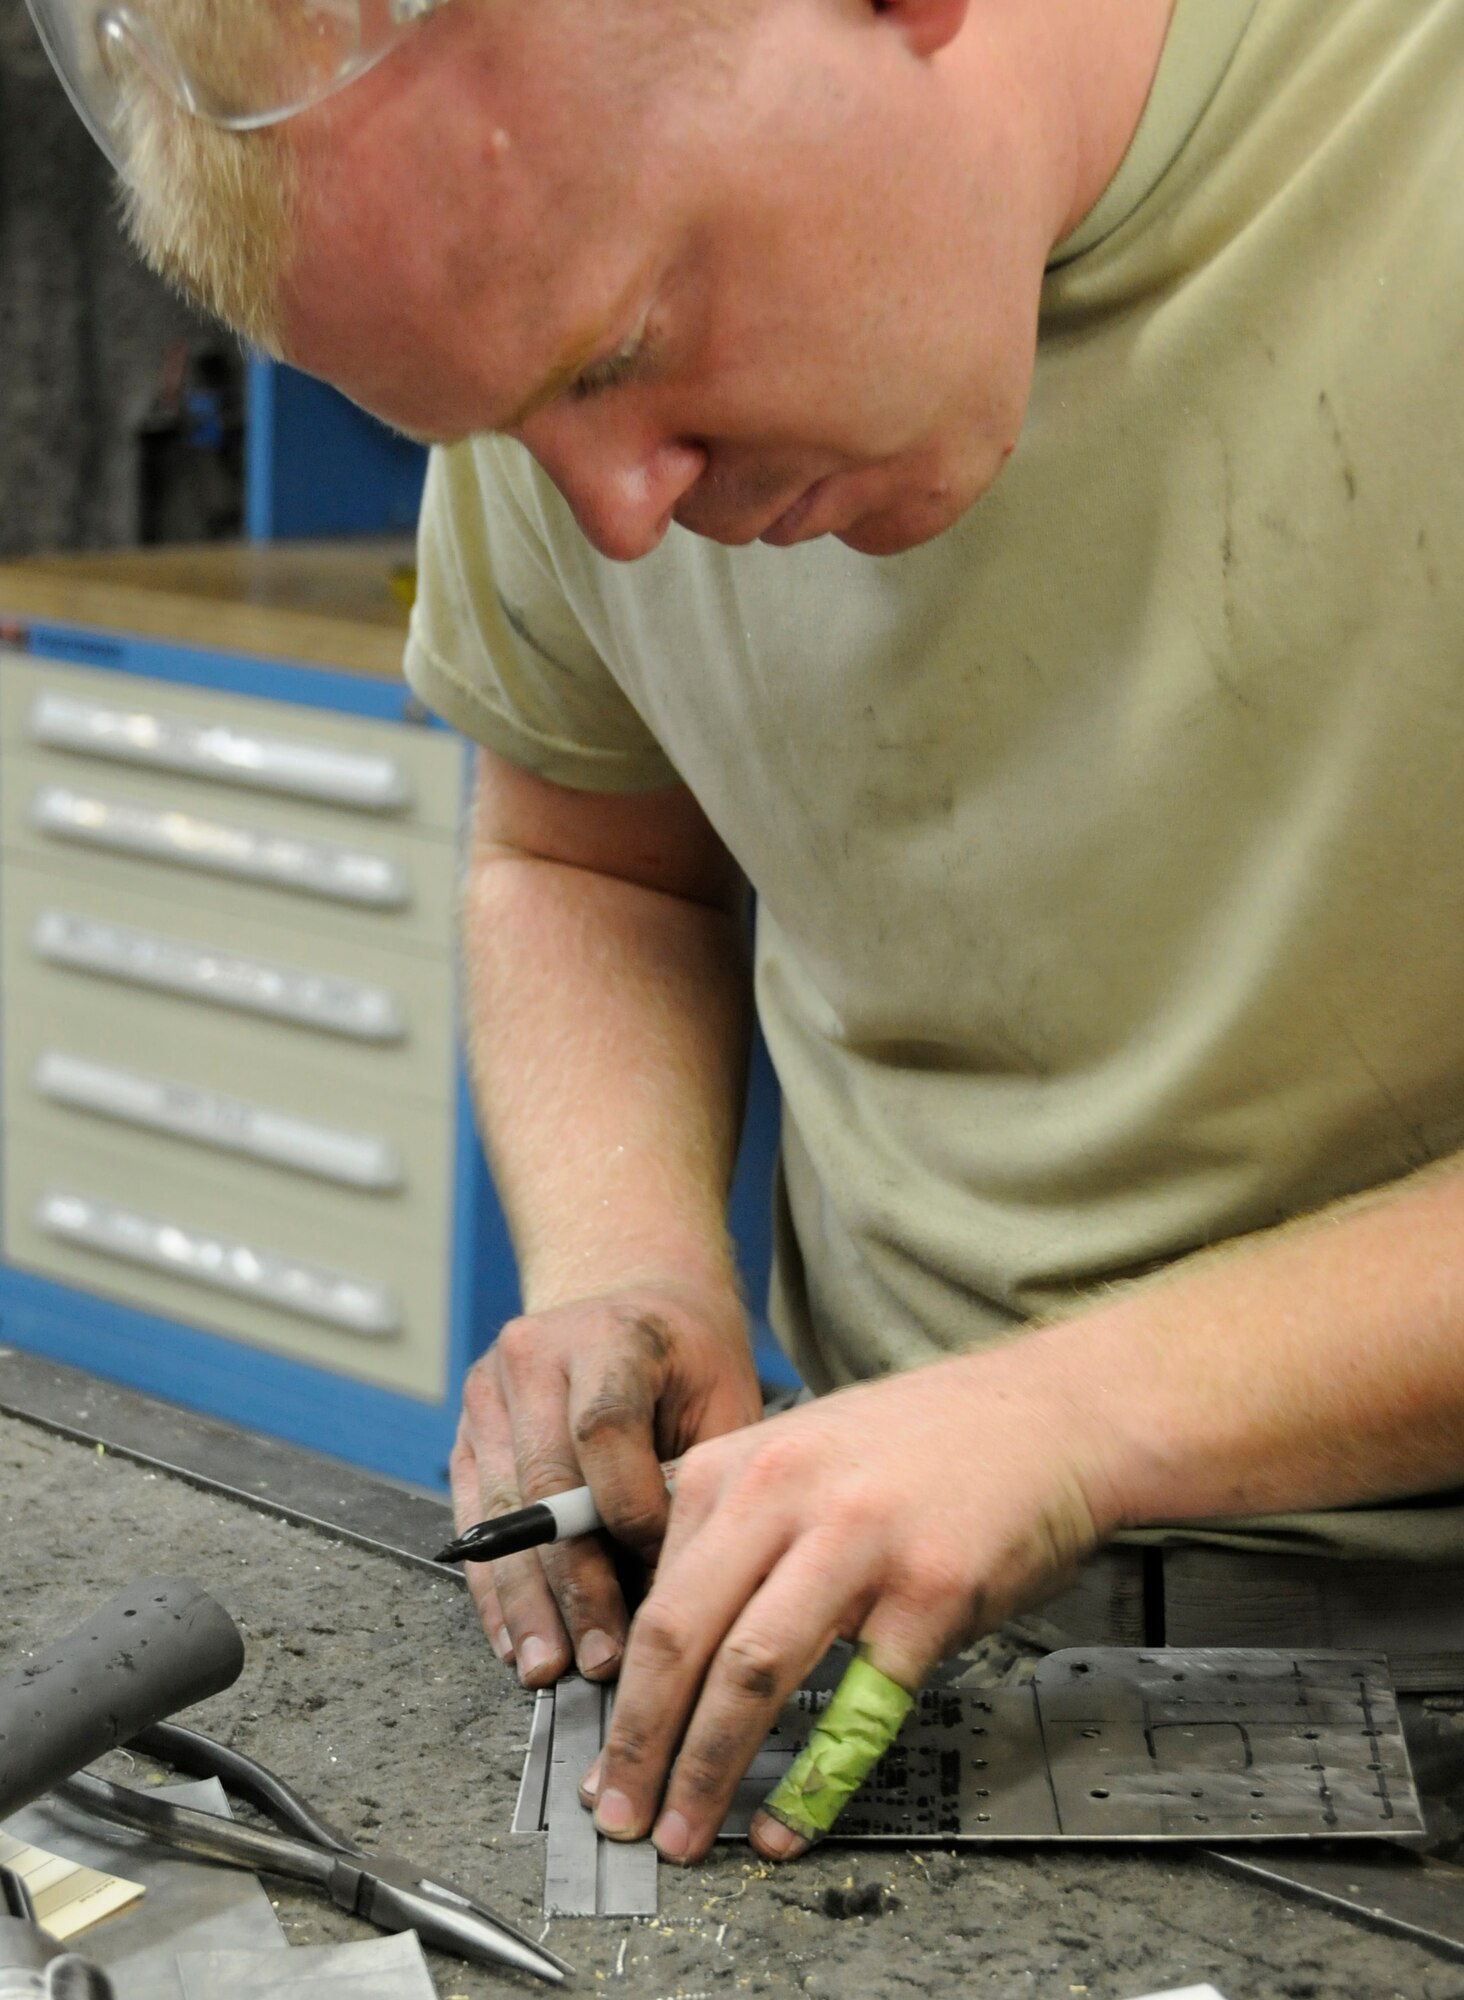 Staff Sgt. Ben Beermann, 379th Expeditionary Maintenance Squadron, Fabrication Flight, marks where to cut a patch he created Sep. 1, 2008, at an undisclosed air base in Southwest Asia. Sergeant Beermann, grinds the corner, smoothing out the edge of the patch that will fix a crack in an E-8C Joint Surveillance and Target Attack Radar System (JSTARS) aircraft cowling.  The non-flush patch provides structural integrity and keeps the elements out.  He measured, cut, punched in rivet holes and then smoothed out all the rough edges before attaching the patch to the cowling.  The JSTARS platform provides an airborne battle management, command and control, intelligence, surveillance and reconnaissance platform supporting Operations Iraqi and Enduring Freedom and Joint Task Force-Horn of Africa.  Its primary mission is to provide theater ground and air commanders with ground surveillance to support attack operations and targeting that contributes to the delay, disruption and destruction of enemy forces.  Sergeant Beermann, a native of Dakota City, Neb., is deployed from Robins Air Force Base, Ga.  (U.S. Air Force Base photo by Tech. Sgt. Michael Boquette/Released)